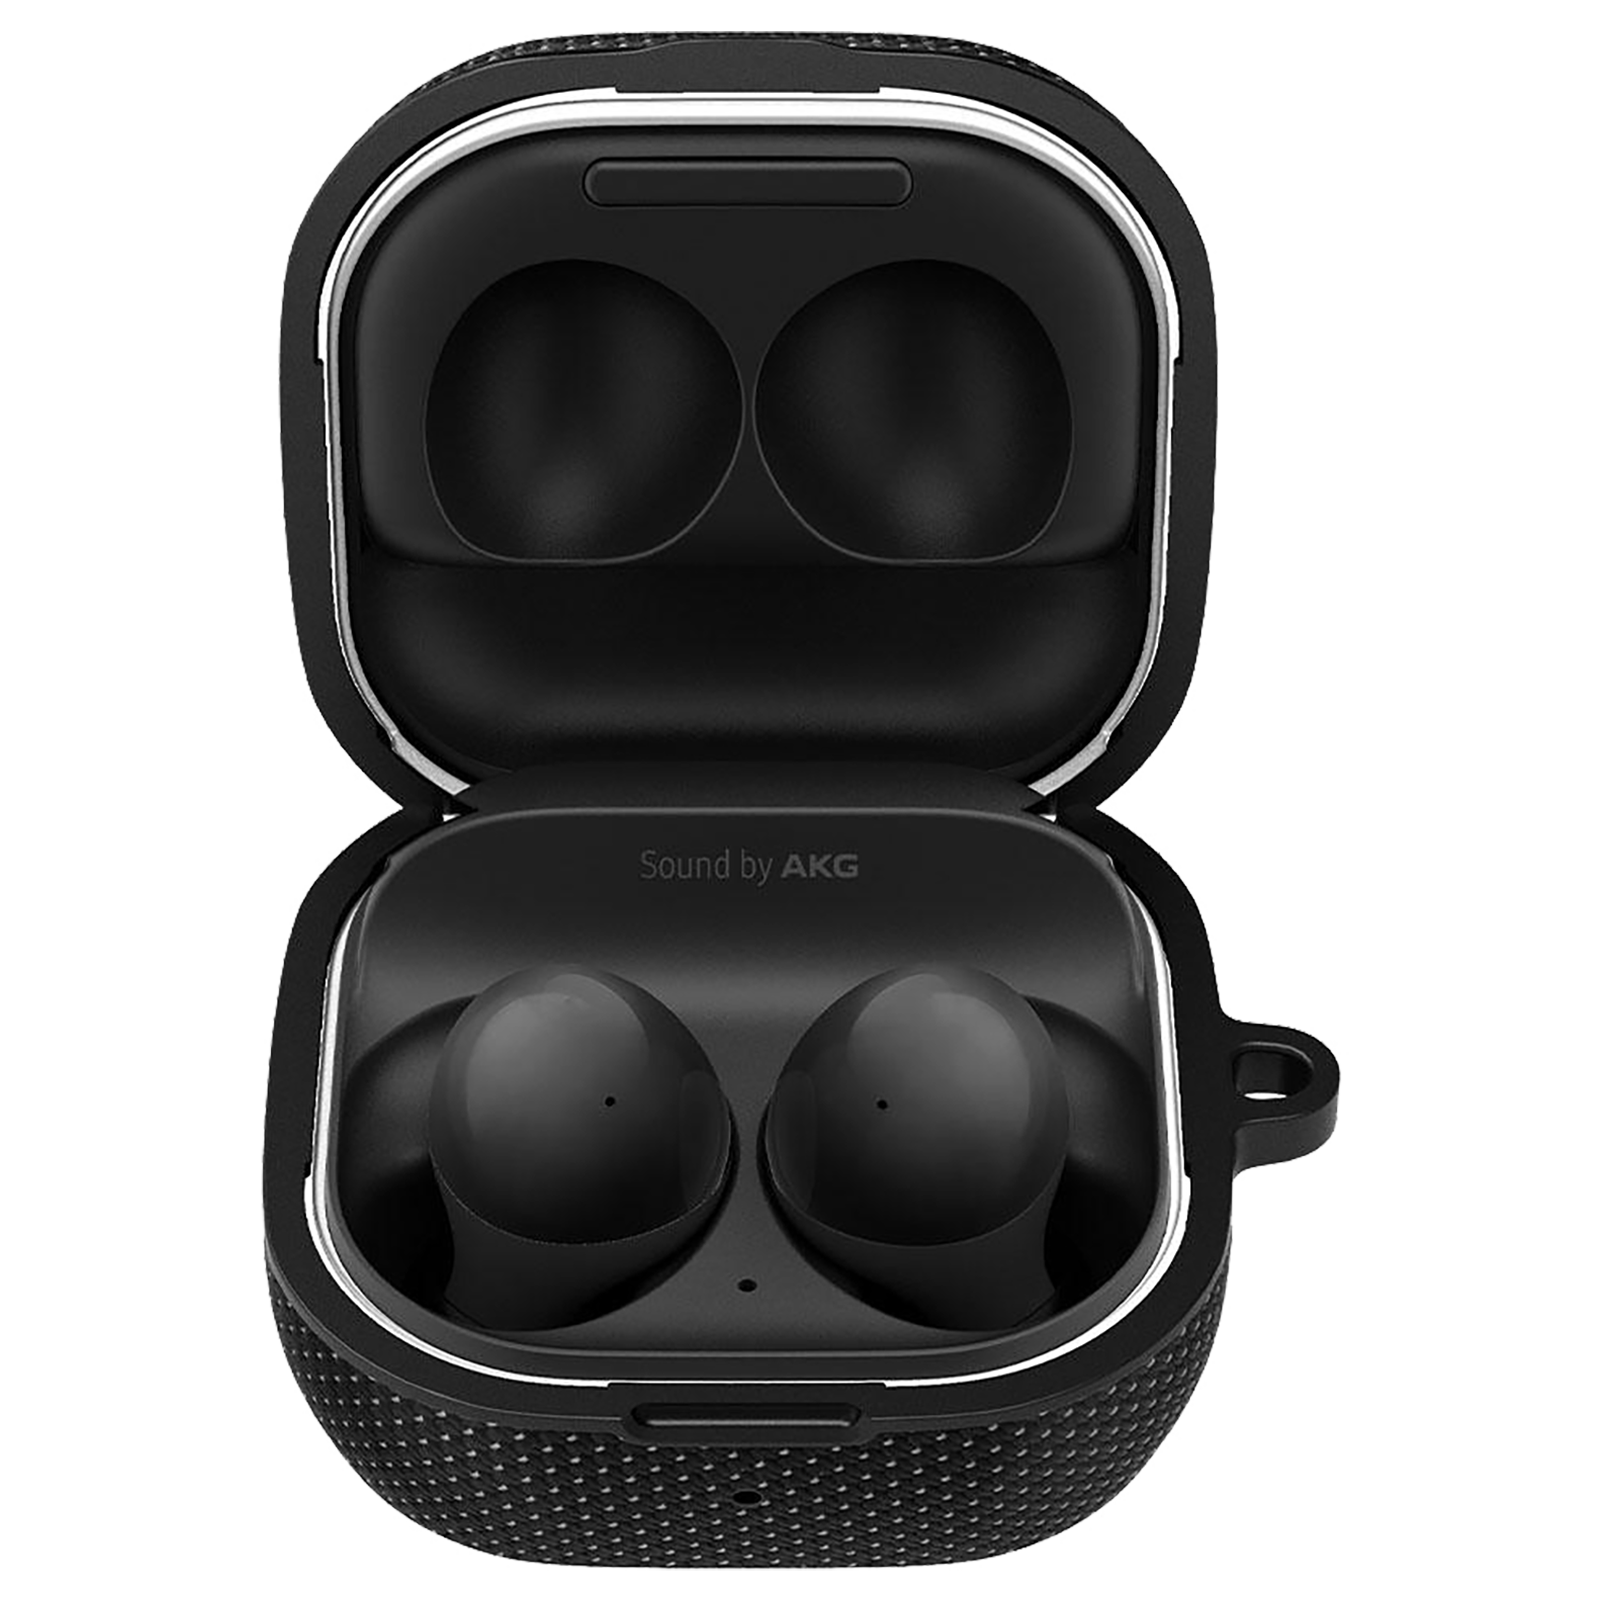 Spigen Classic Fit TPU & PC Full Cover Case For Galaxy Buds 2/Galaxy Buds Pro/Galaxy Buds Live (Cutout Supports The Power Light, ASD01444, Black)